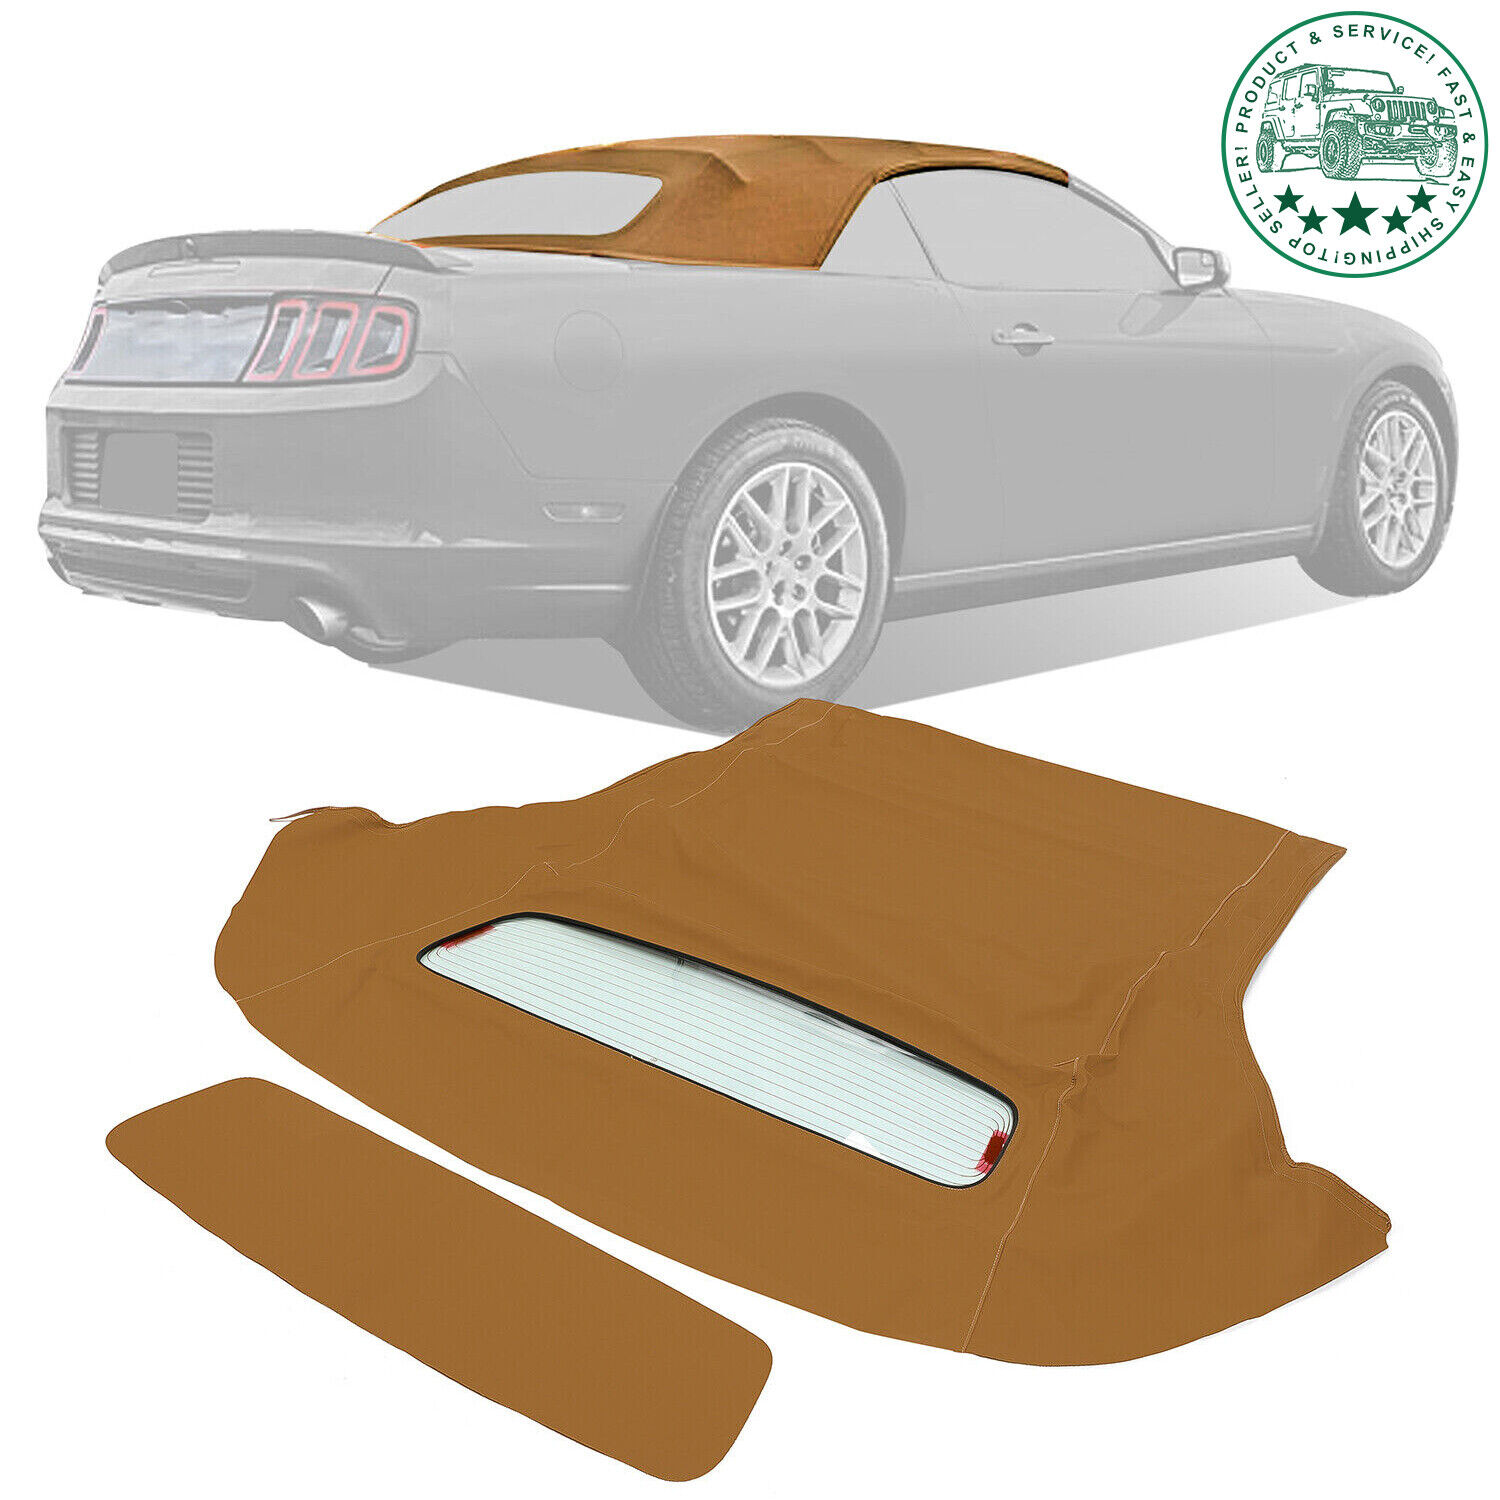 For 05-14 Ford Mustang Convertible Soft Top & Heated Glass Window Sailcloth Tan